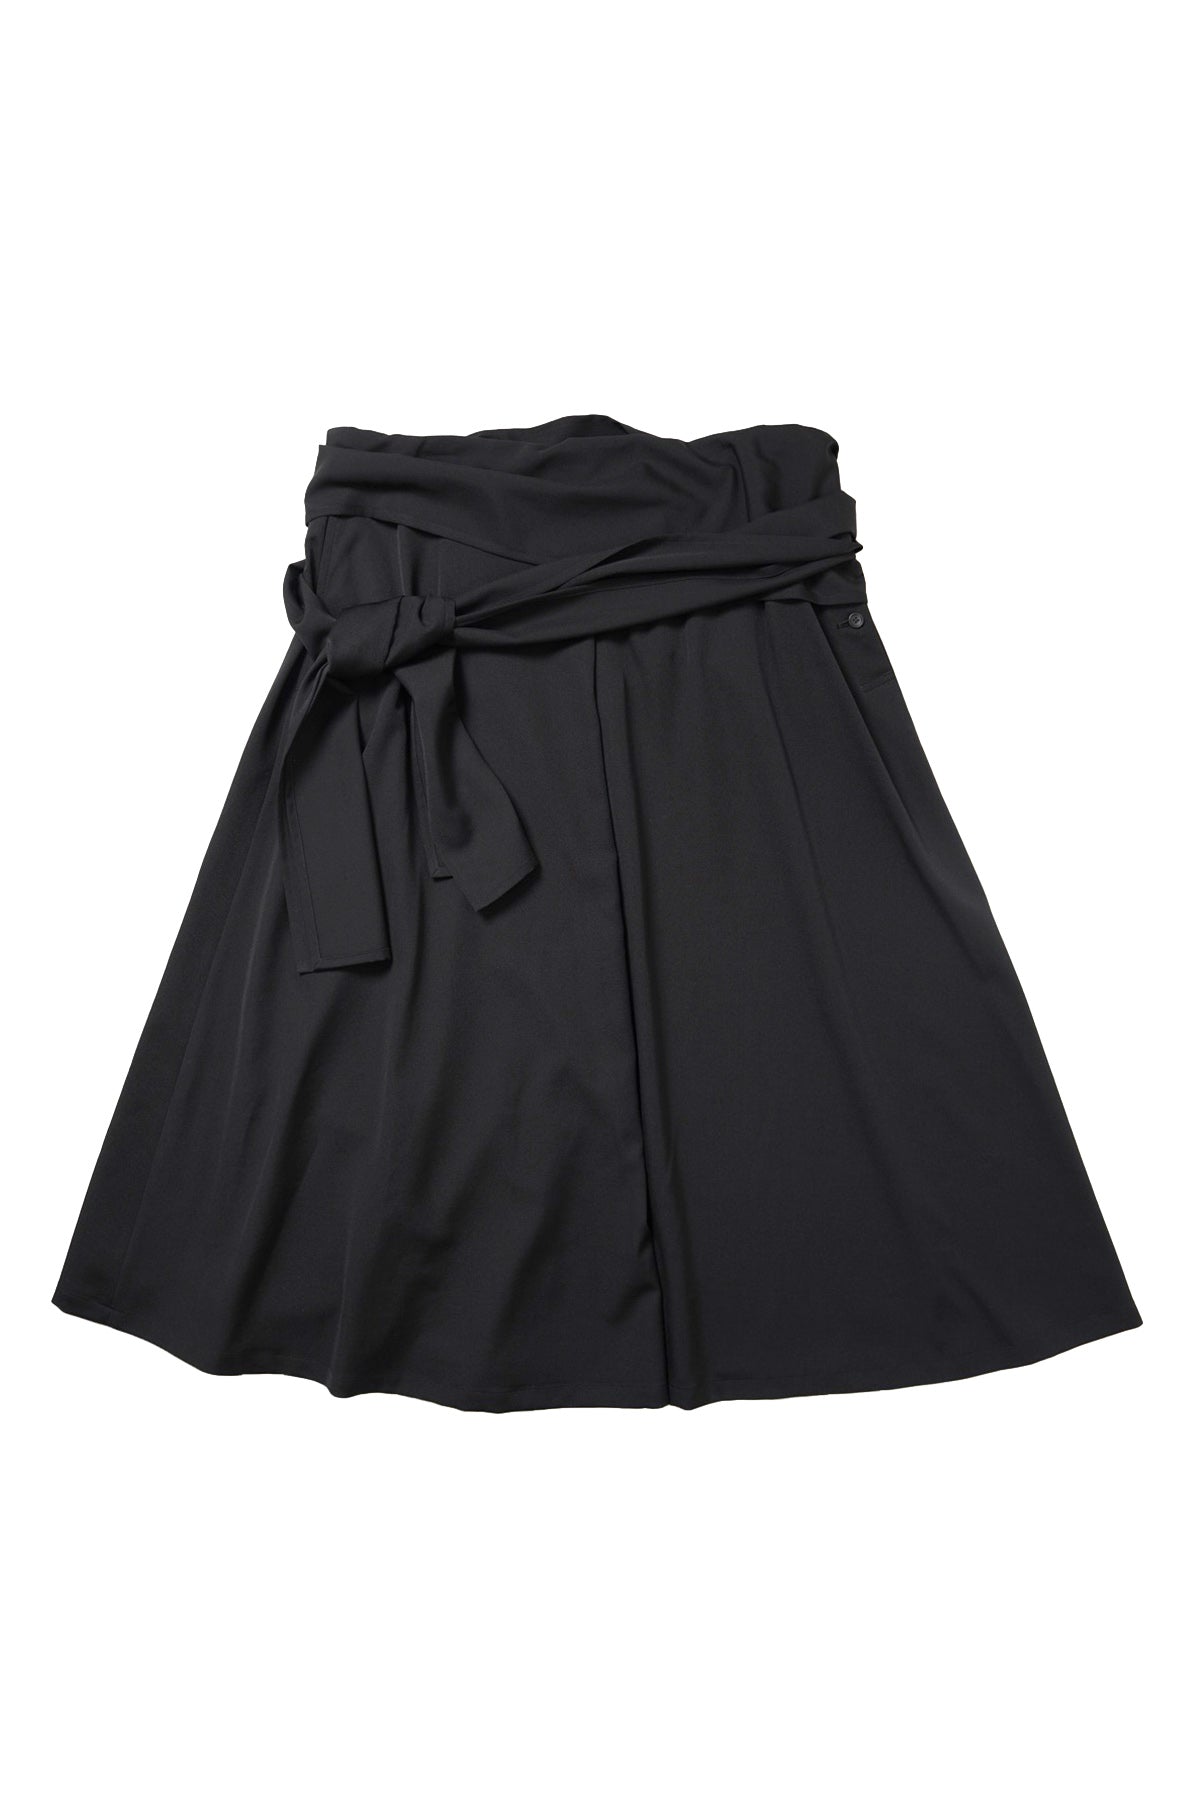 TIED FLARE SKIRT